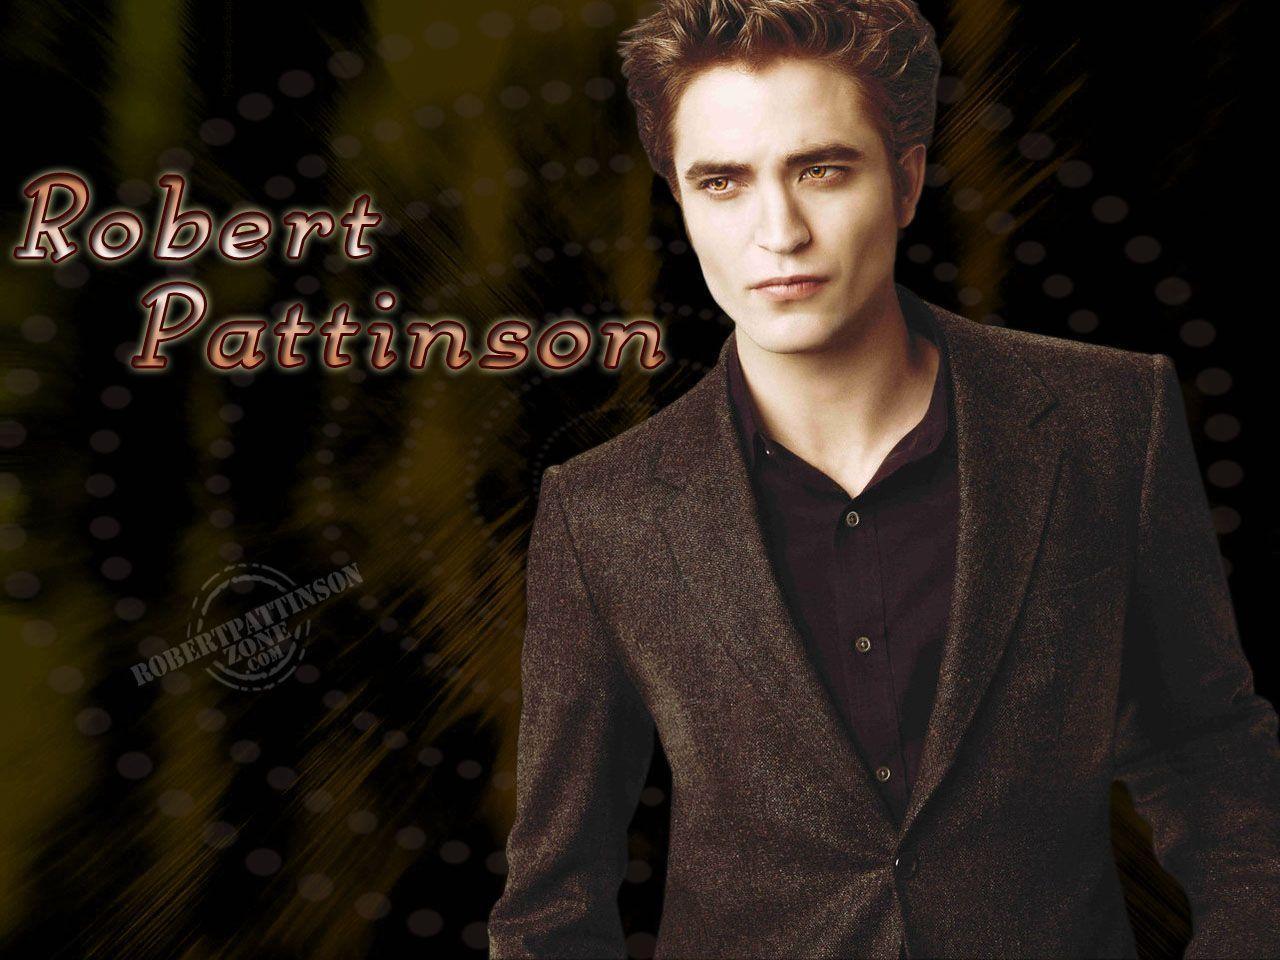 Robert Pattinson Picture, Videos and more